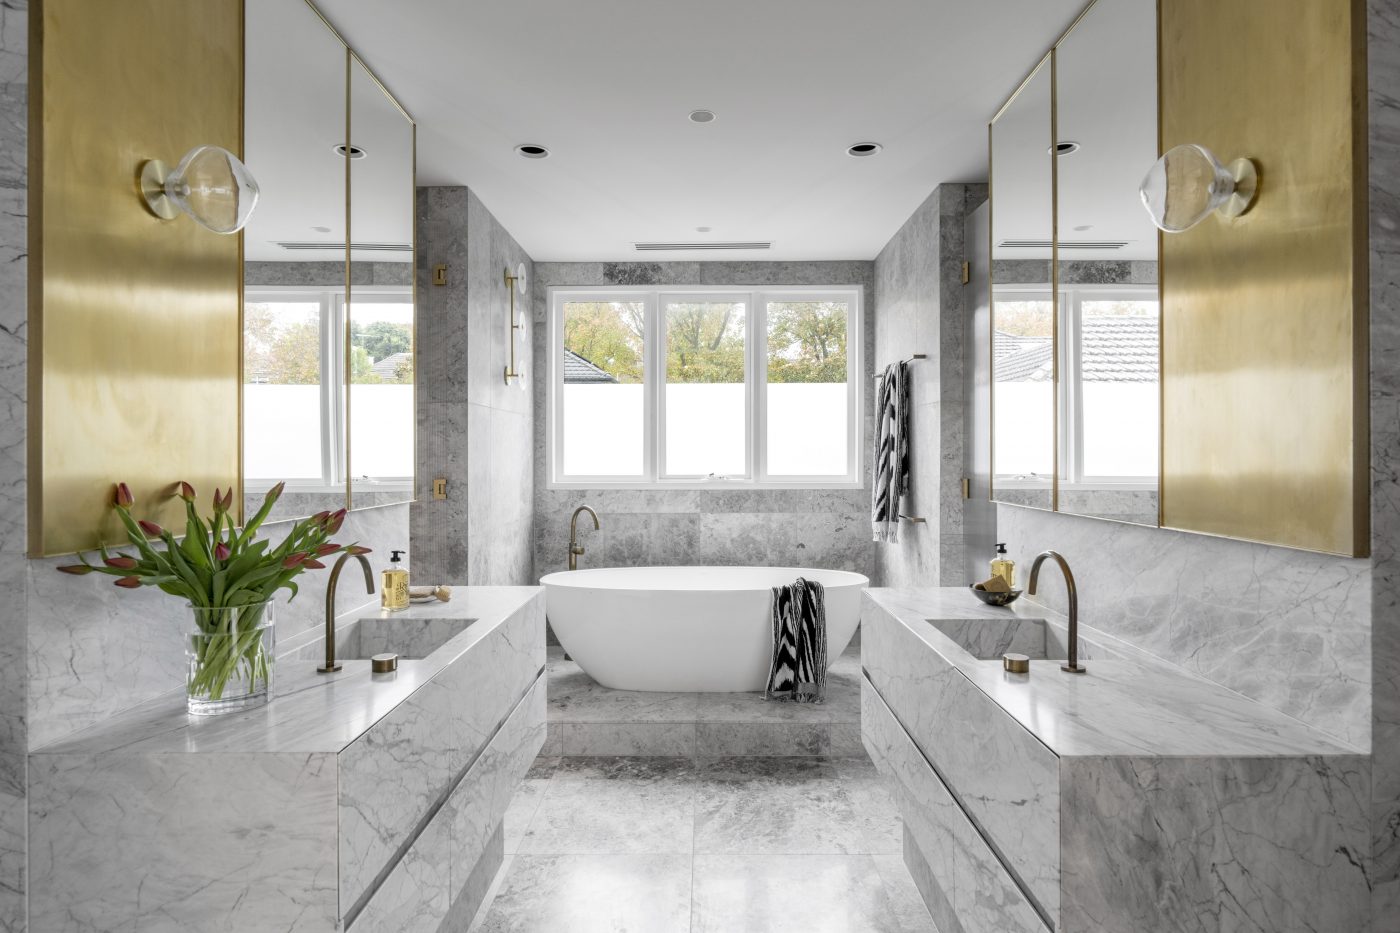 SUPER-WHITE-HONED-MARBLE_RMS-TRADERS_NATURAL-STONE-INTERNAL-BATHROOM-TILES-SLAB-SUPPLIER-MELBOURNE-1-scaled